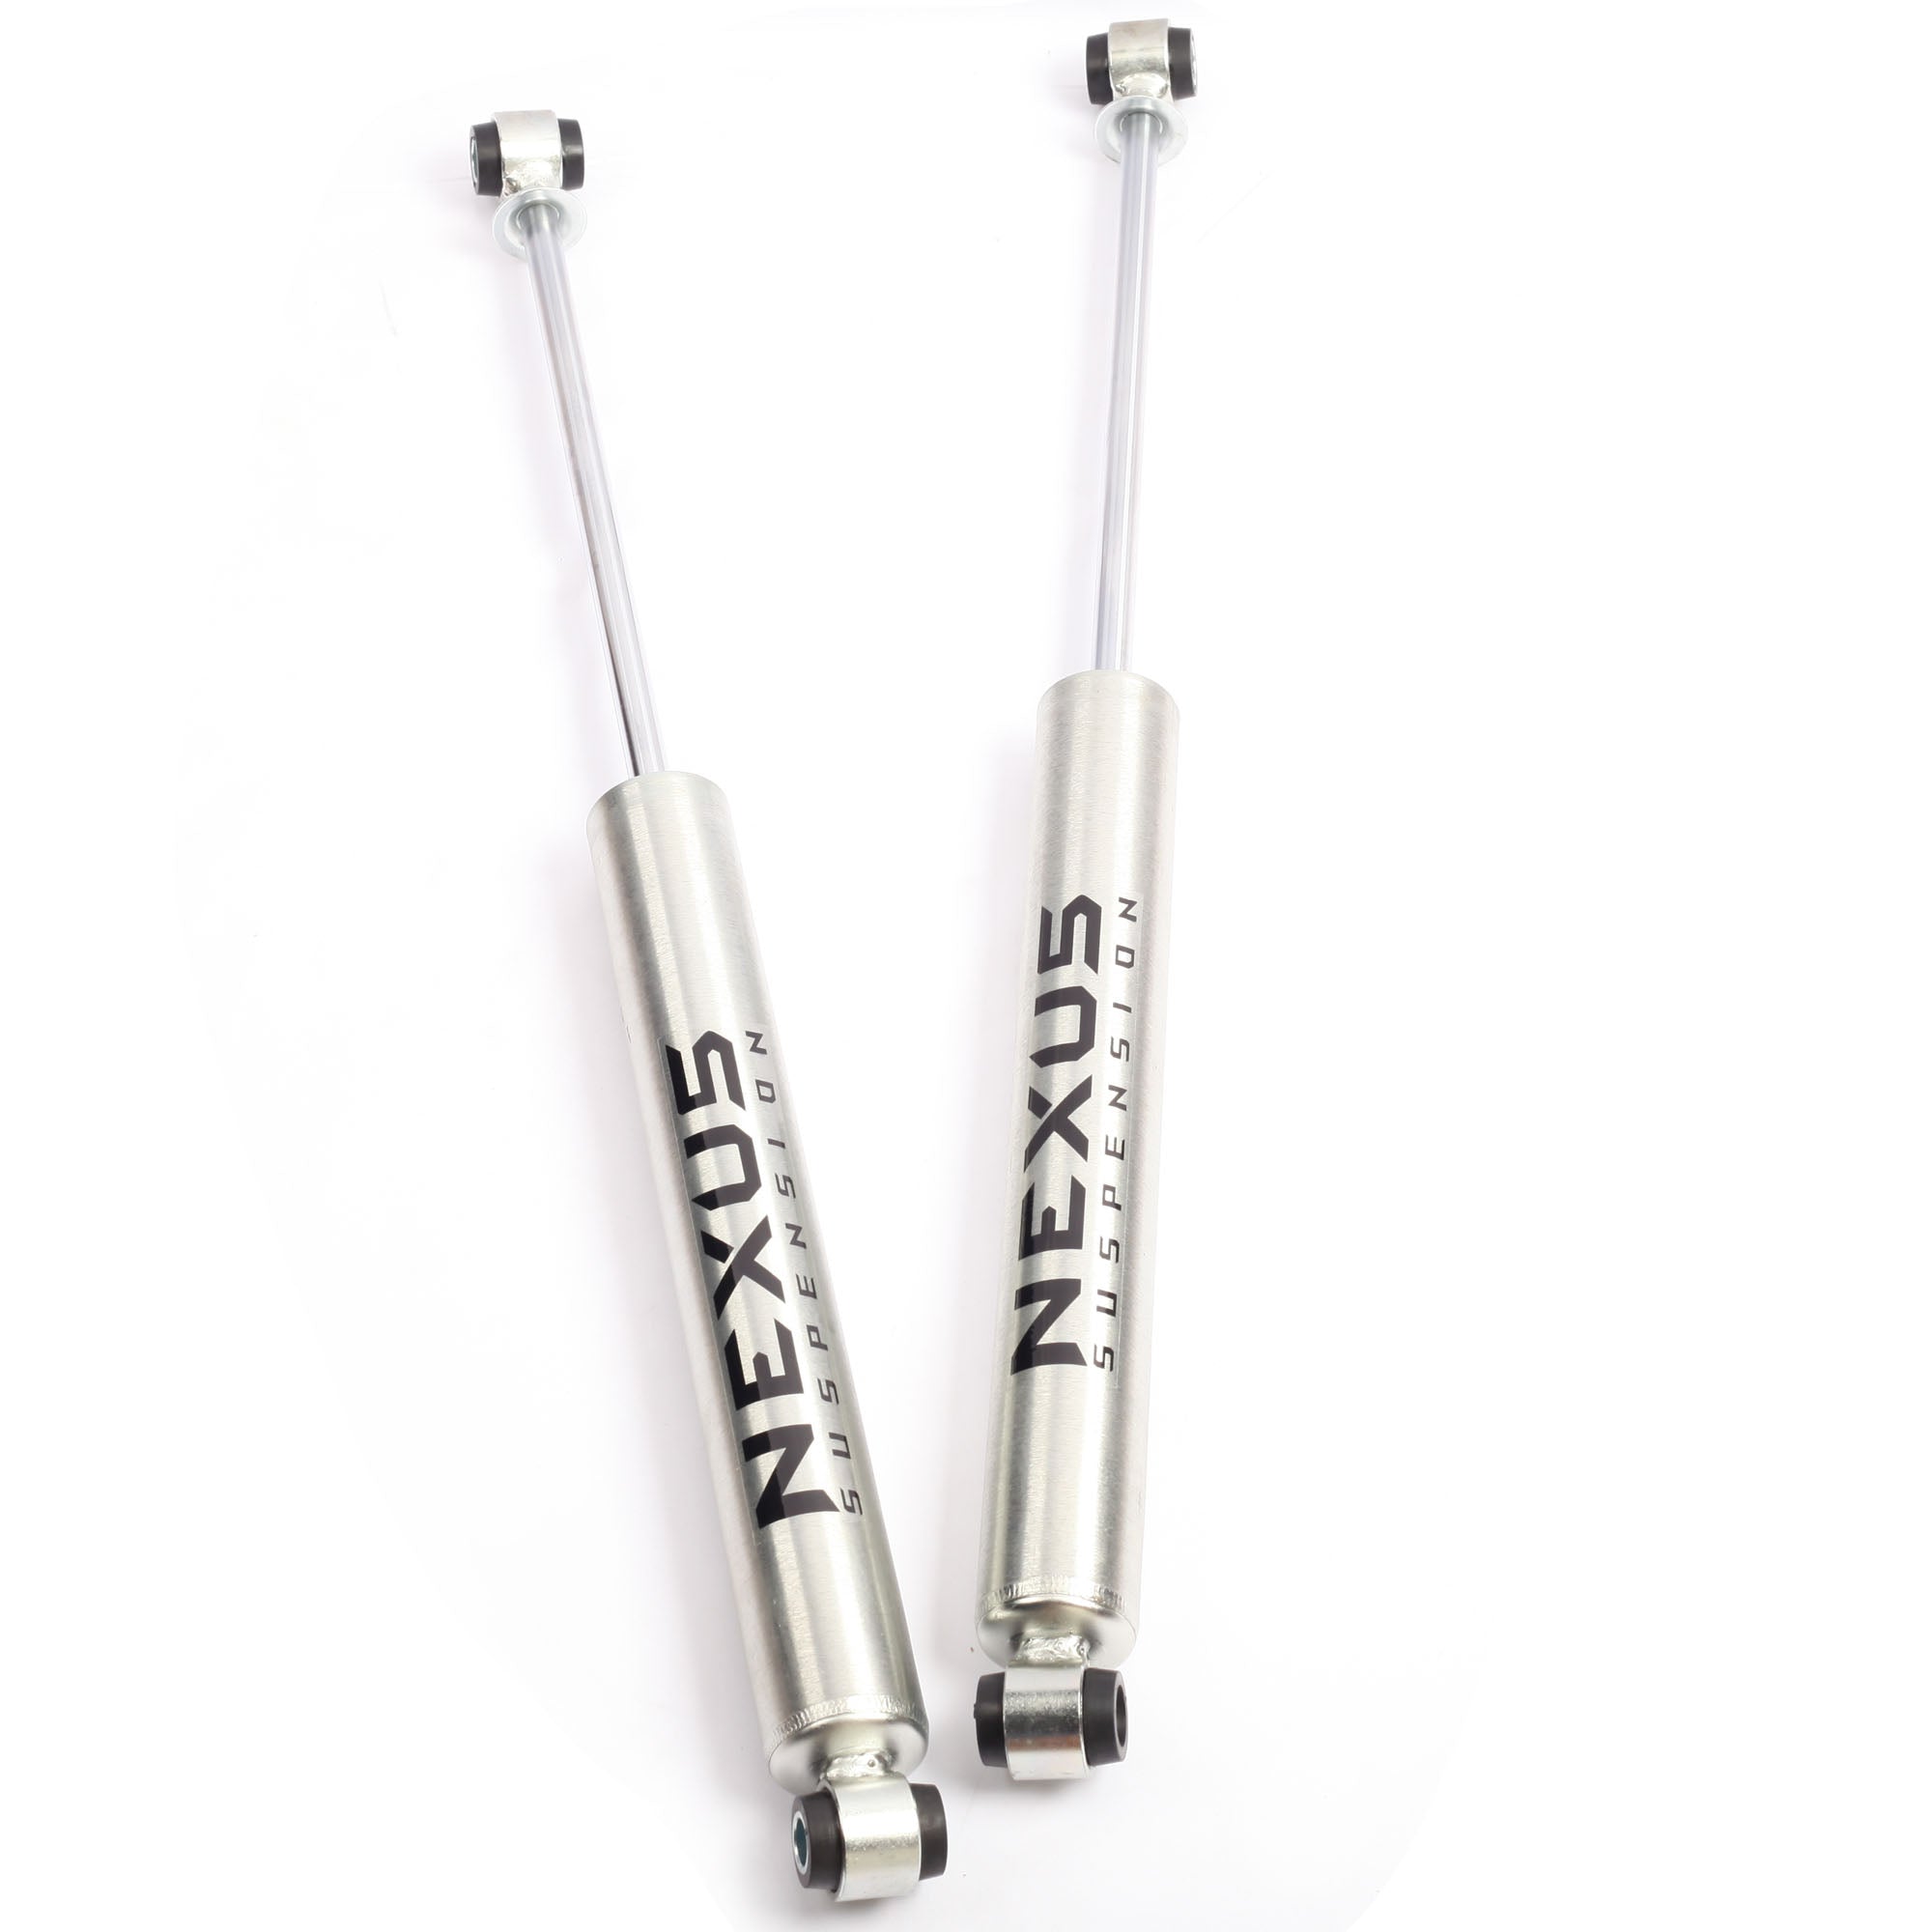 NEXUS SUSPENSION 0Inch Lift Rear Shock Absorber for 2003-2012 Dodge Ram 2500 3500 4WD,Zinc Plated Coating,Pair Pack